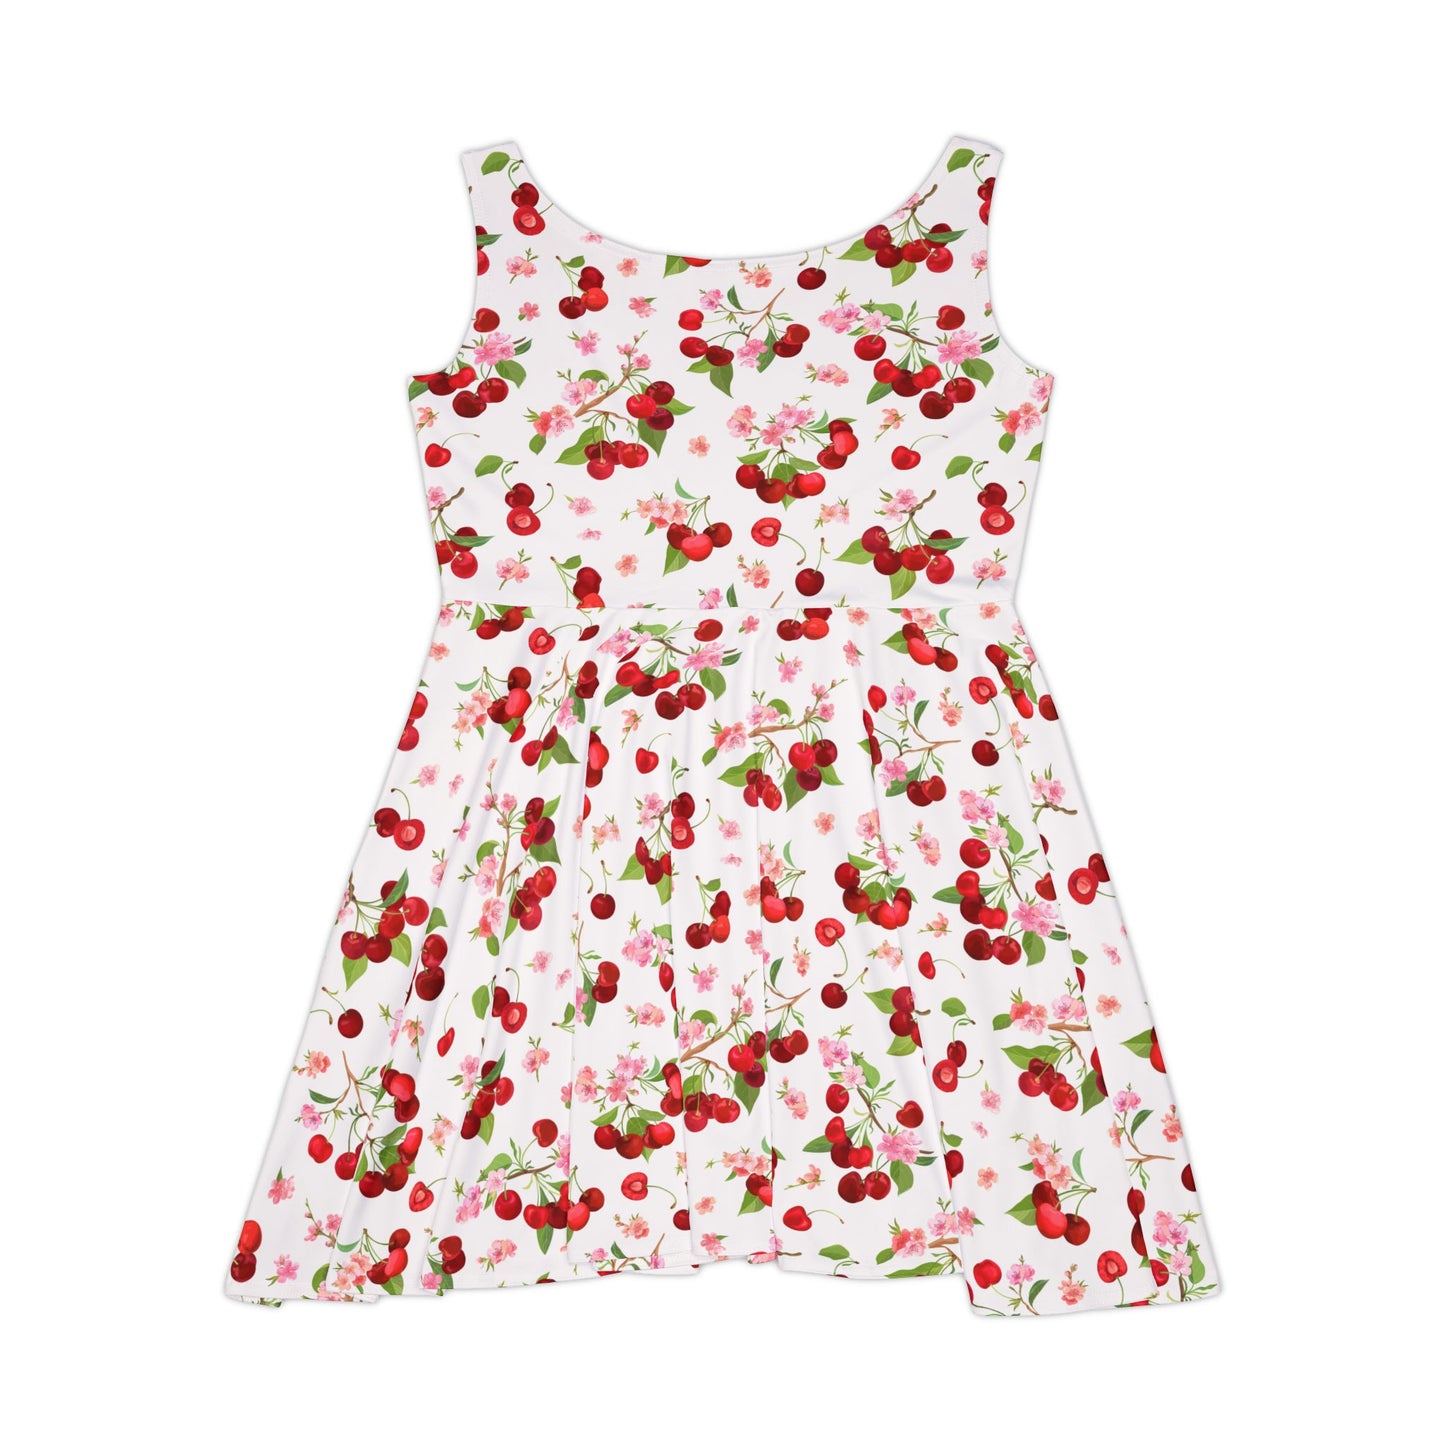 All Over Prints - Women's Skater Dress Cherry On A Stem Very Blossom Skater Dress, Wedding, Cocktail And Casual